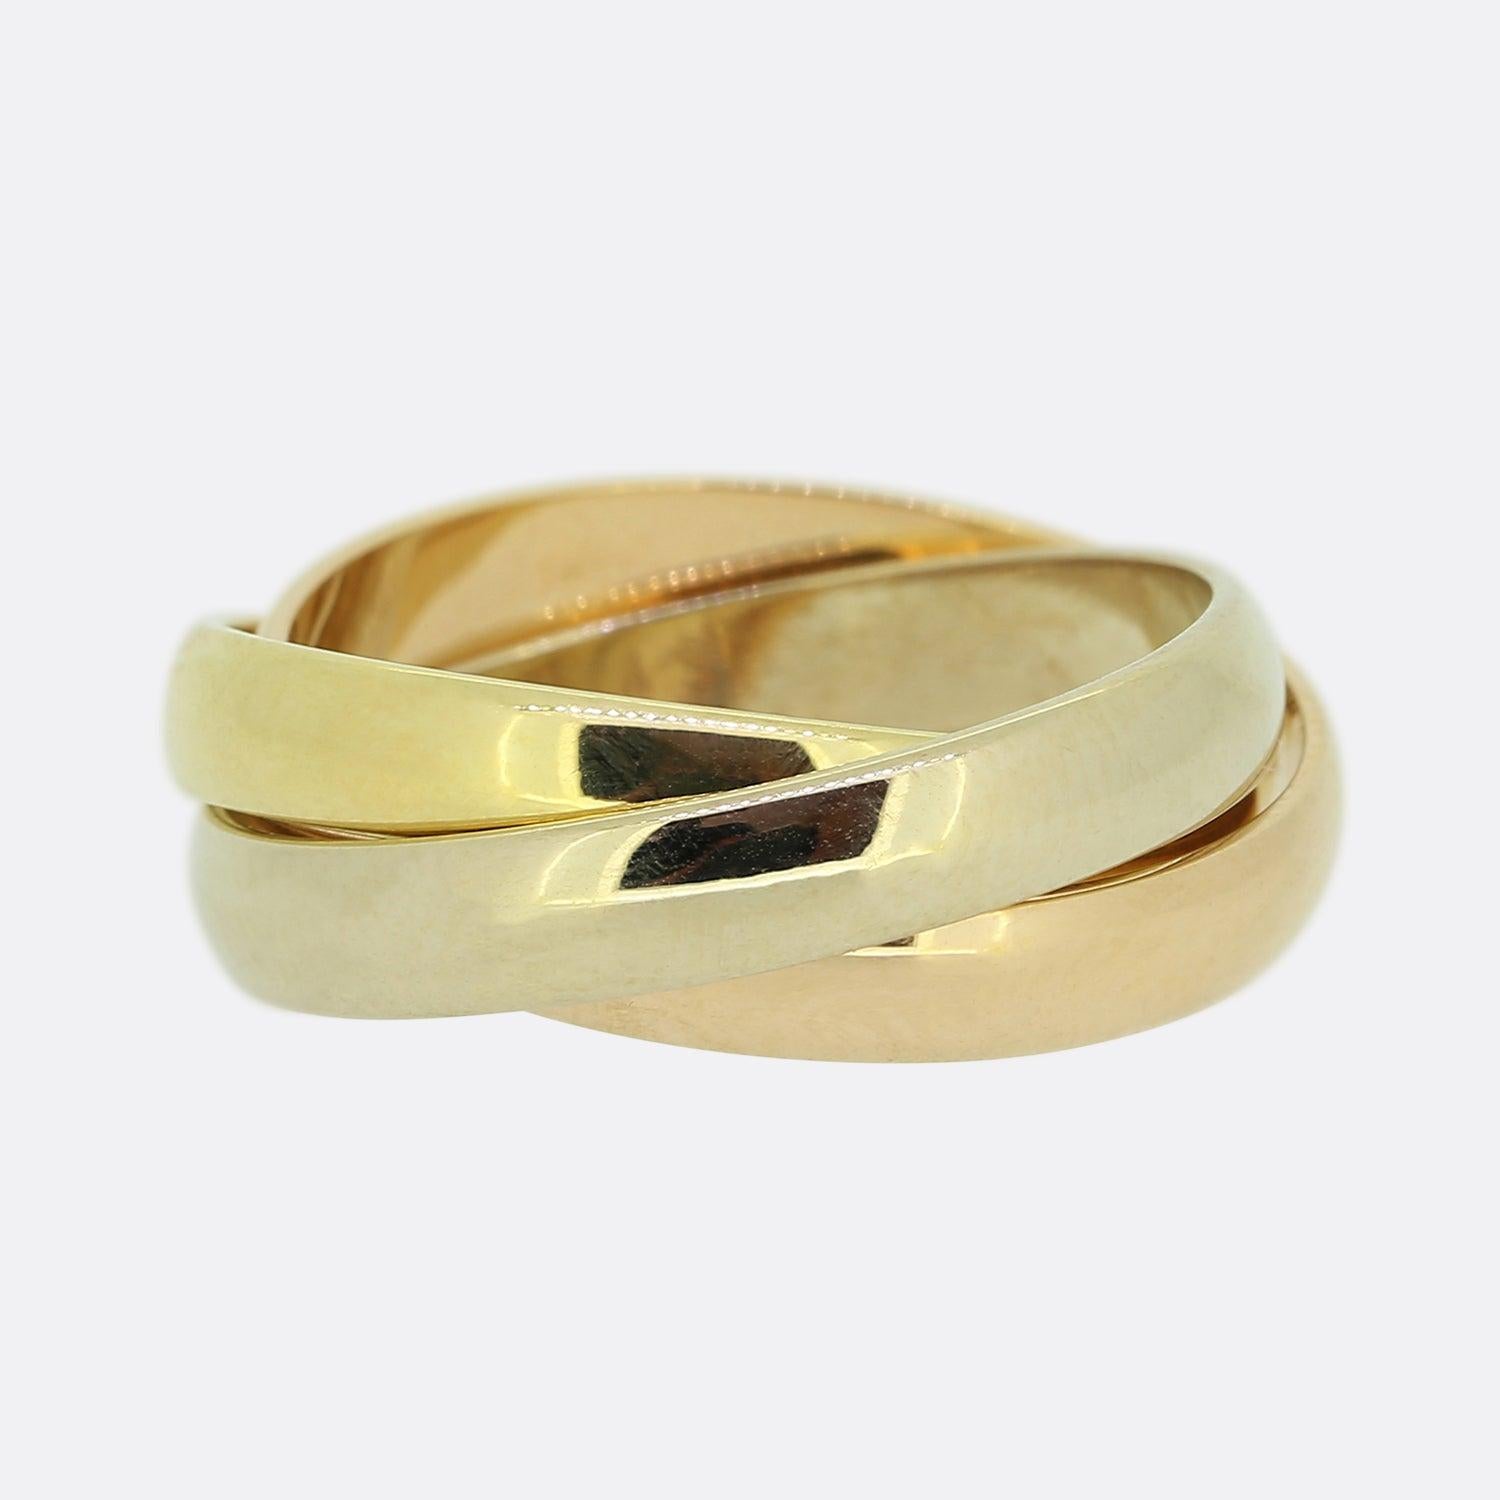 Here we have an 18ct gold trinity ring from the world renowned luxury jewellery house of Cartier. The ring features three interwinding bands of yellow, white and rose gold; the rose of which has been engraved with the words 'Les Must de Cartier'. 